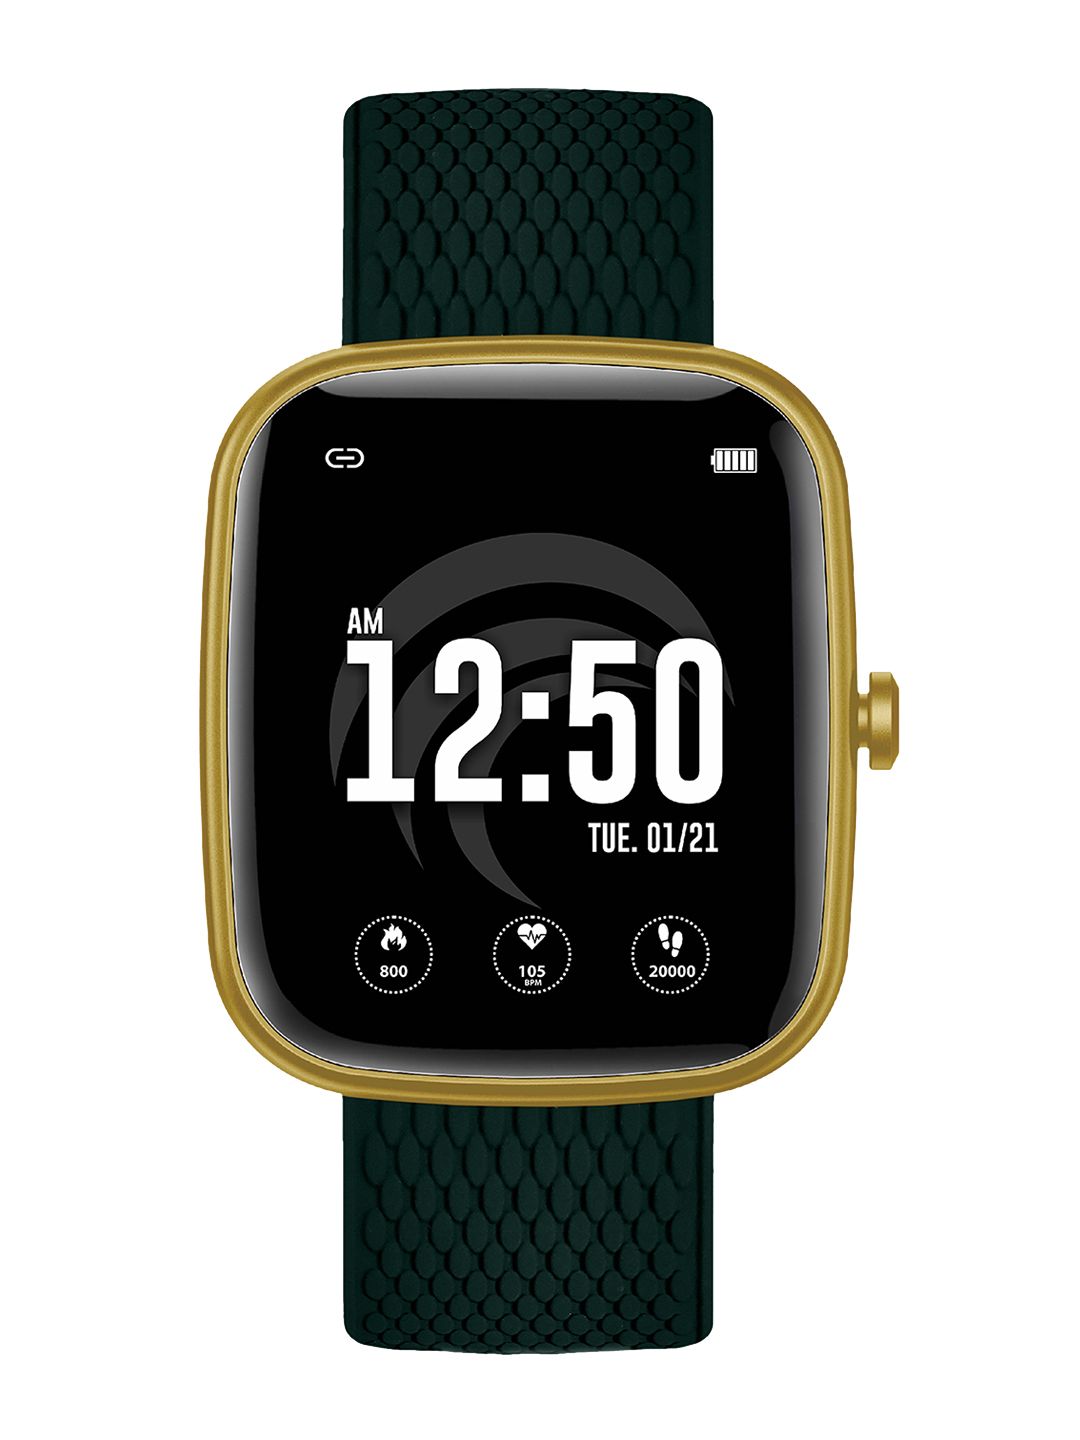 Cellecor Gold ActFit A4 Waterproof Smartwatch Price in India